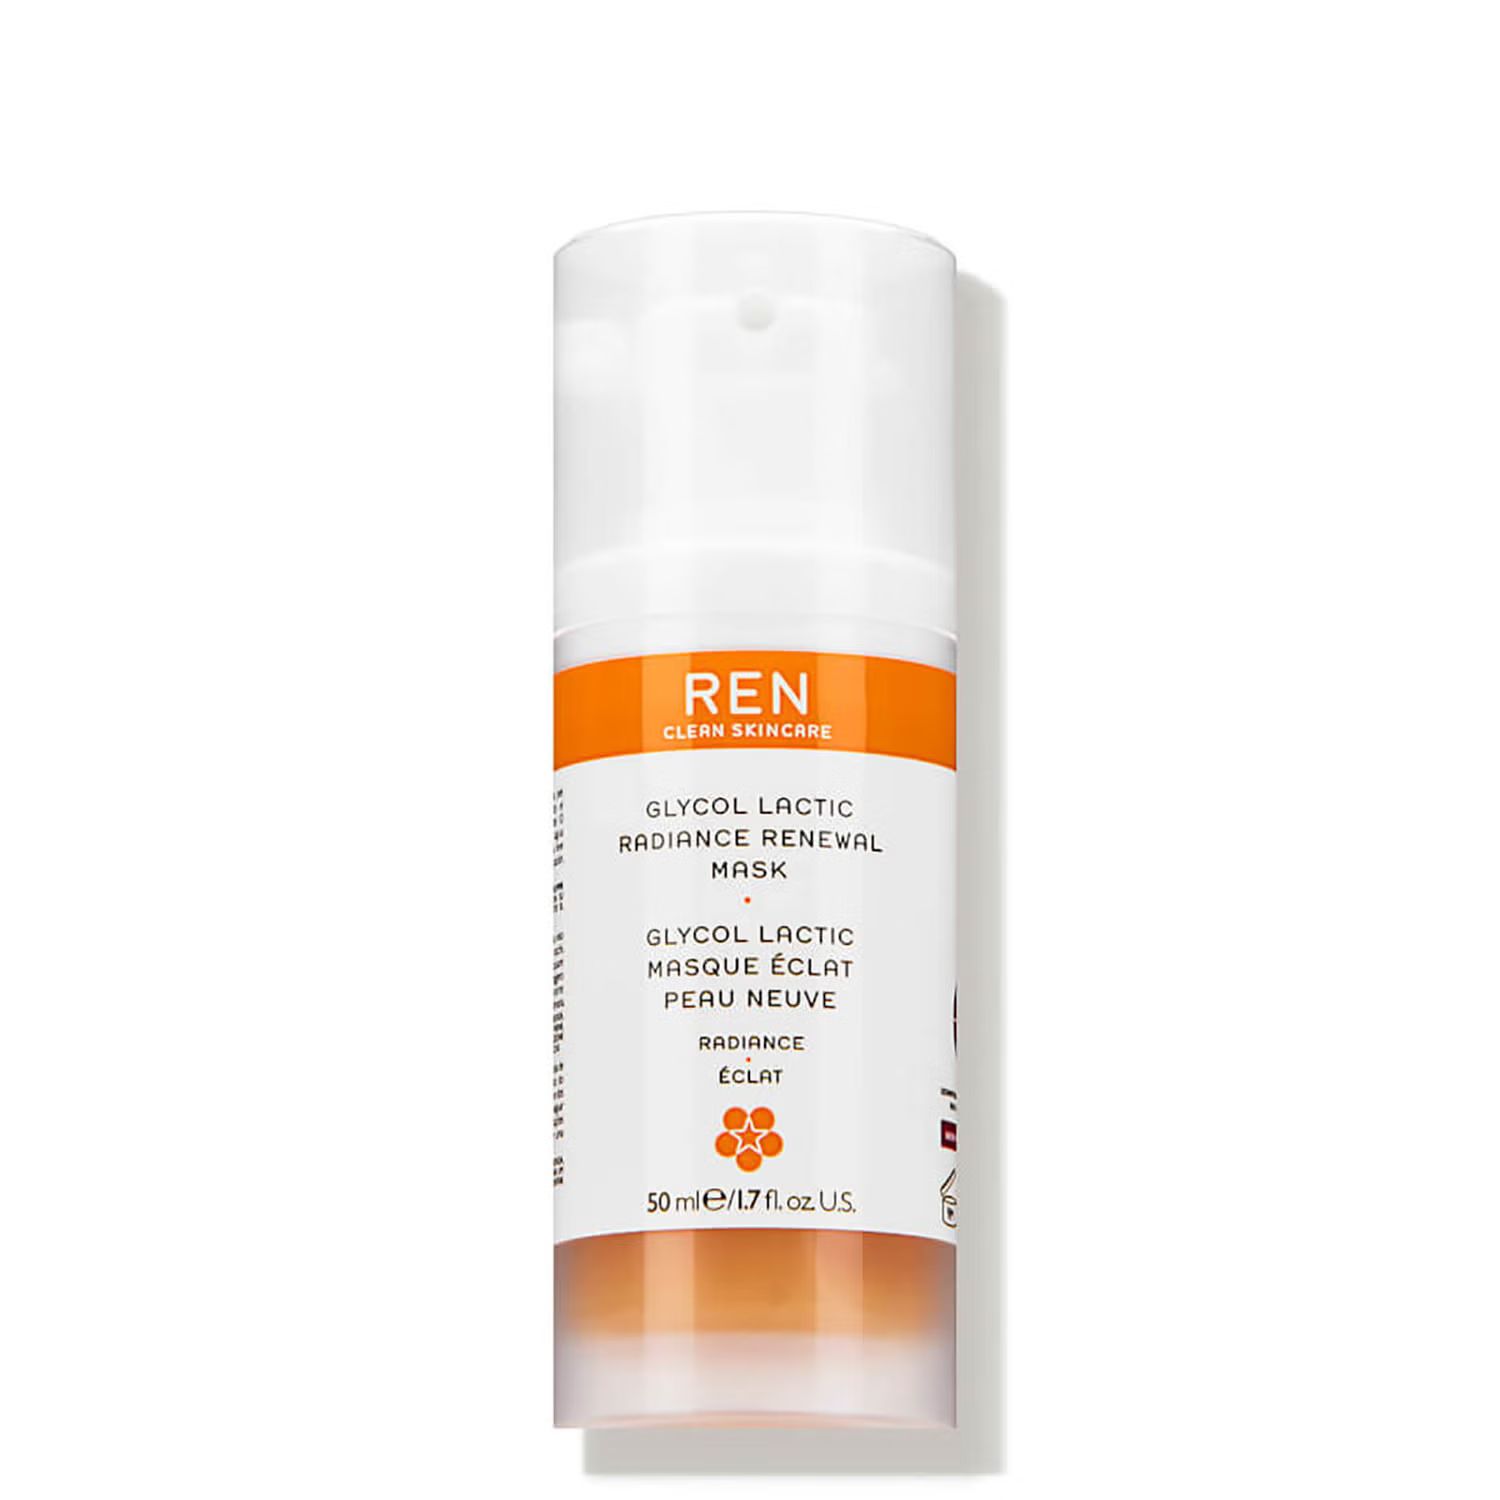 REN Clean Skincare Glycol Lactic Radiance Mask 50ml | Skincare RX